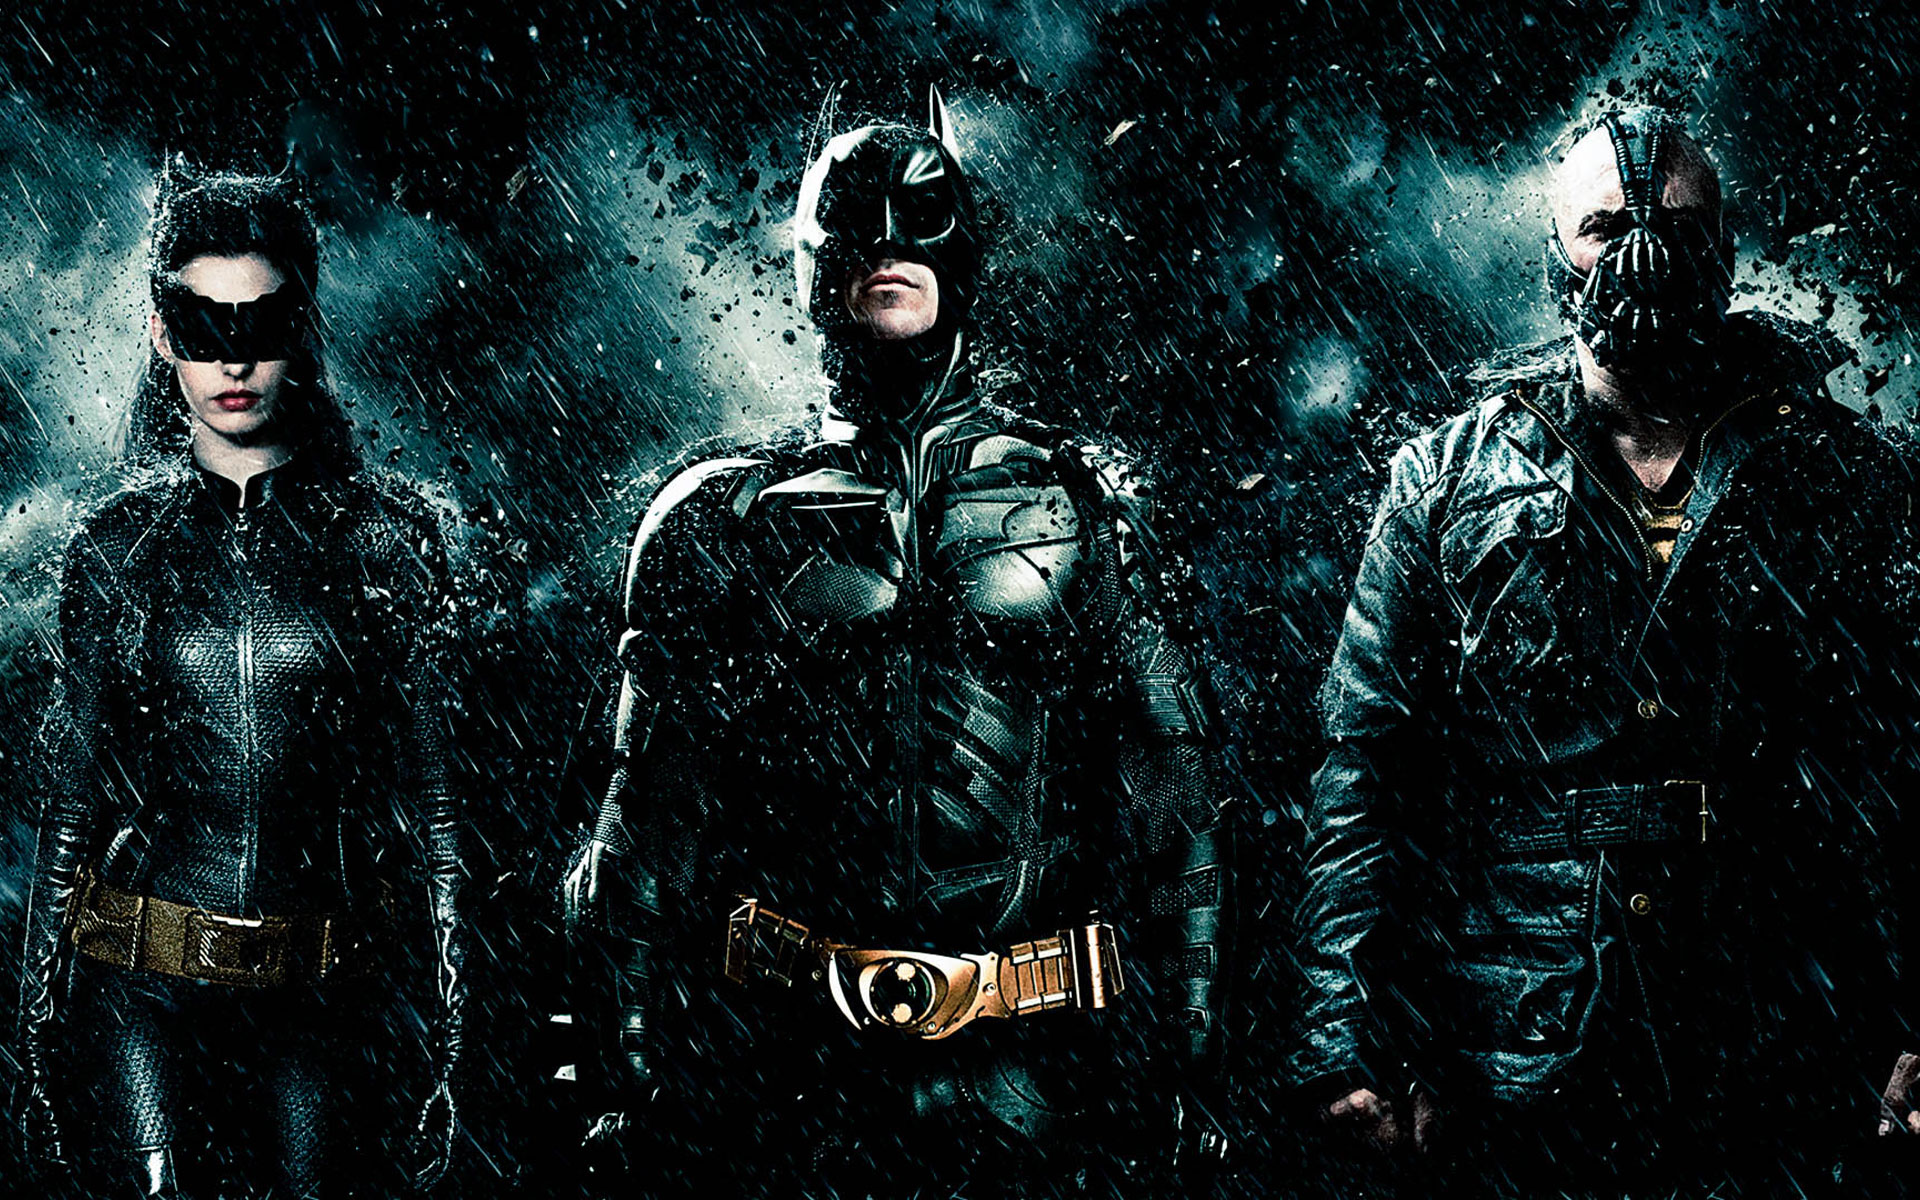 Amazing Background Wallpaper The Dark Knight Super High Quality